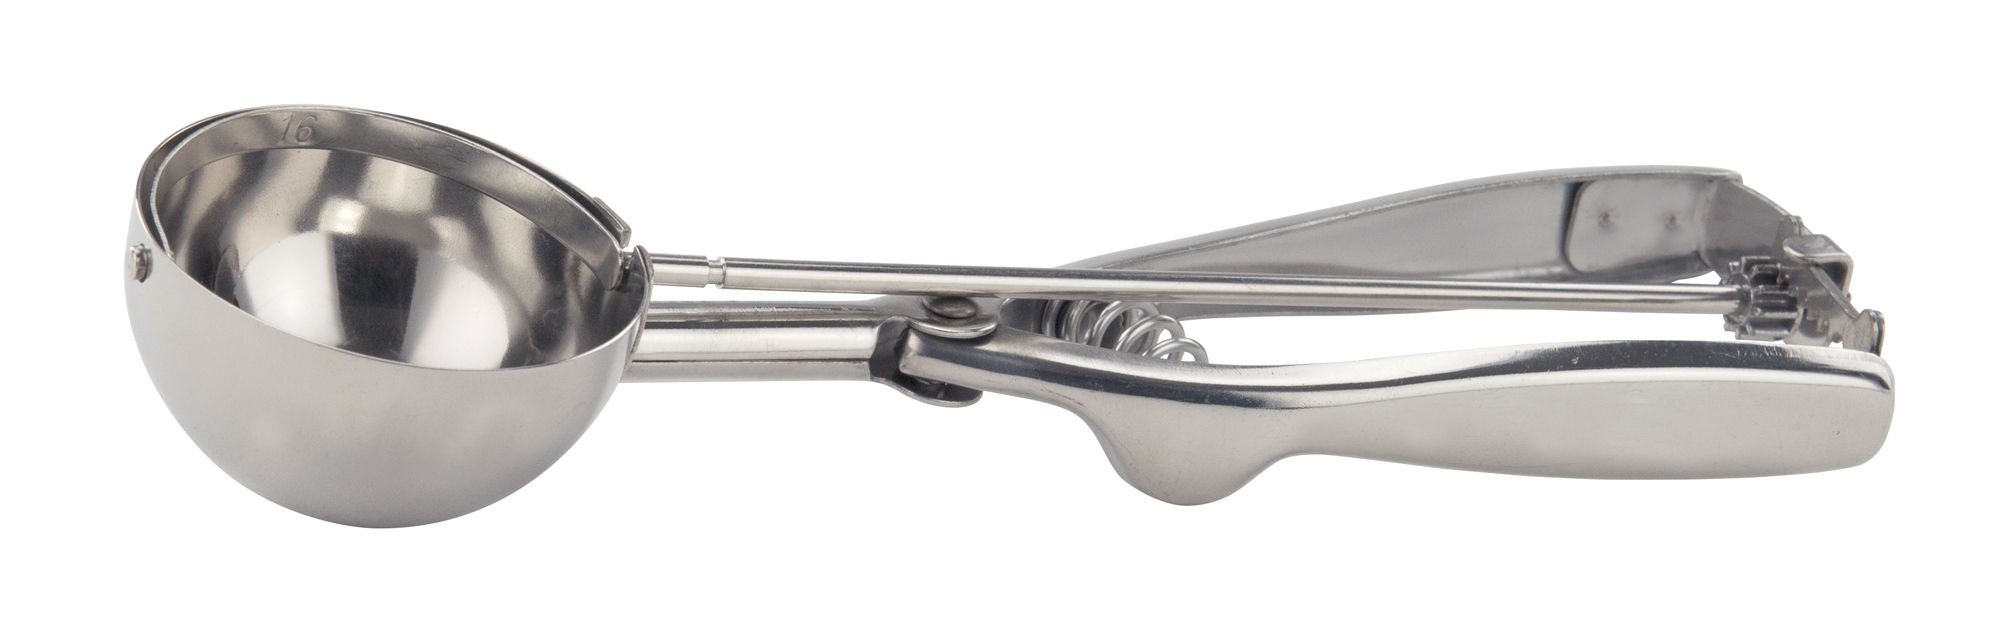 Winco ISS-16 Stainless Steel 2-3/4 oz. Disher/Portioner, Size 16